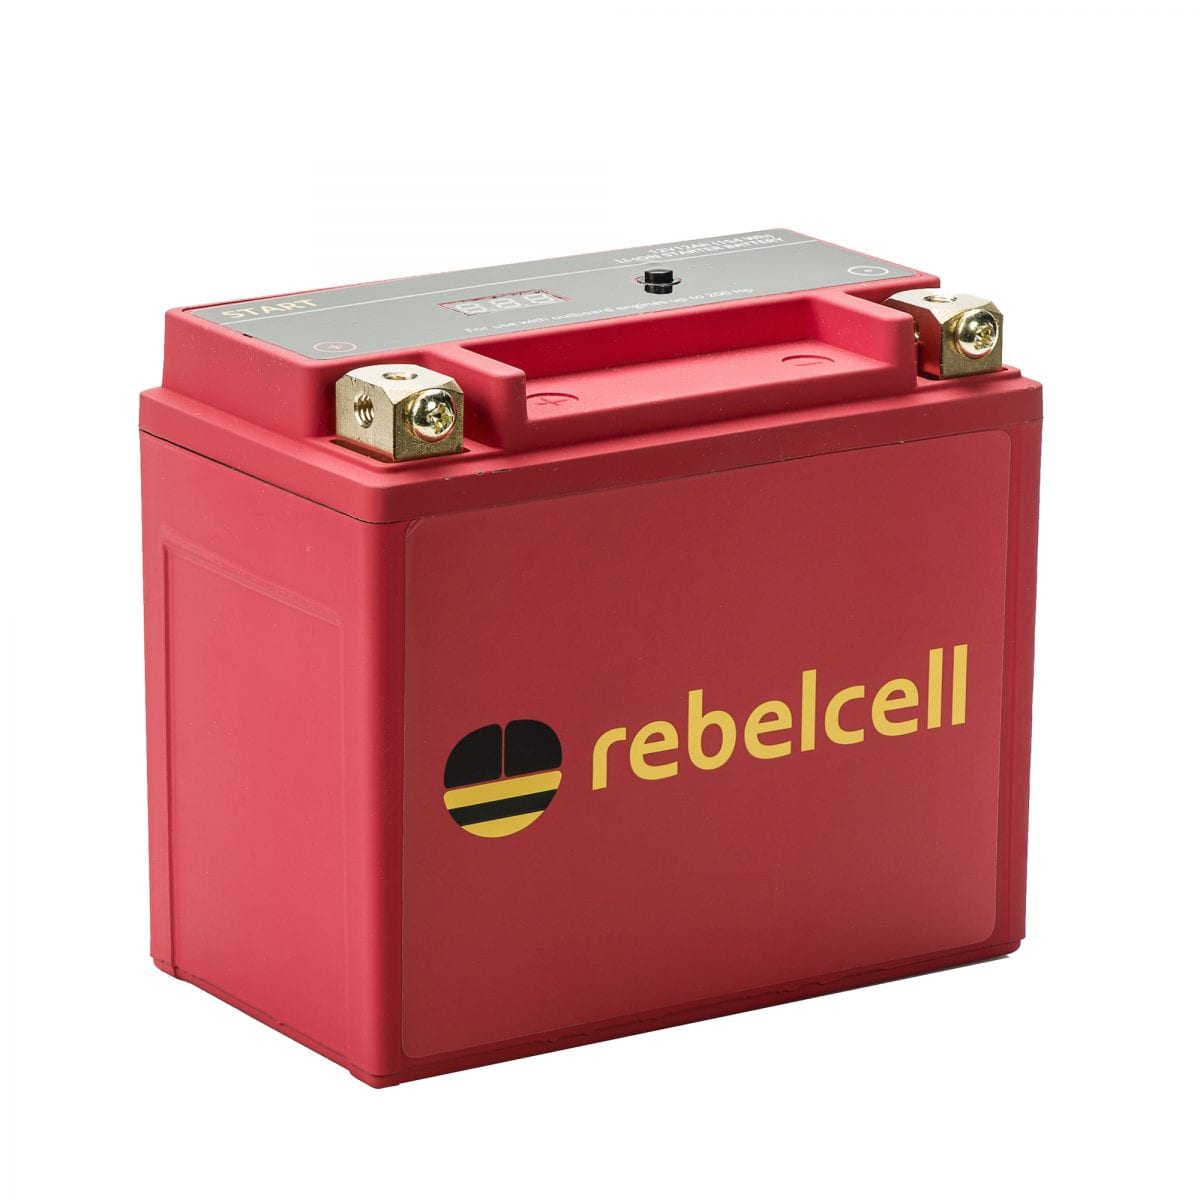 Rebelcell Start product image